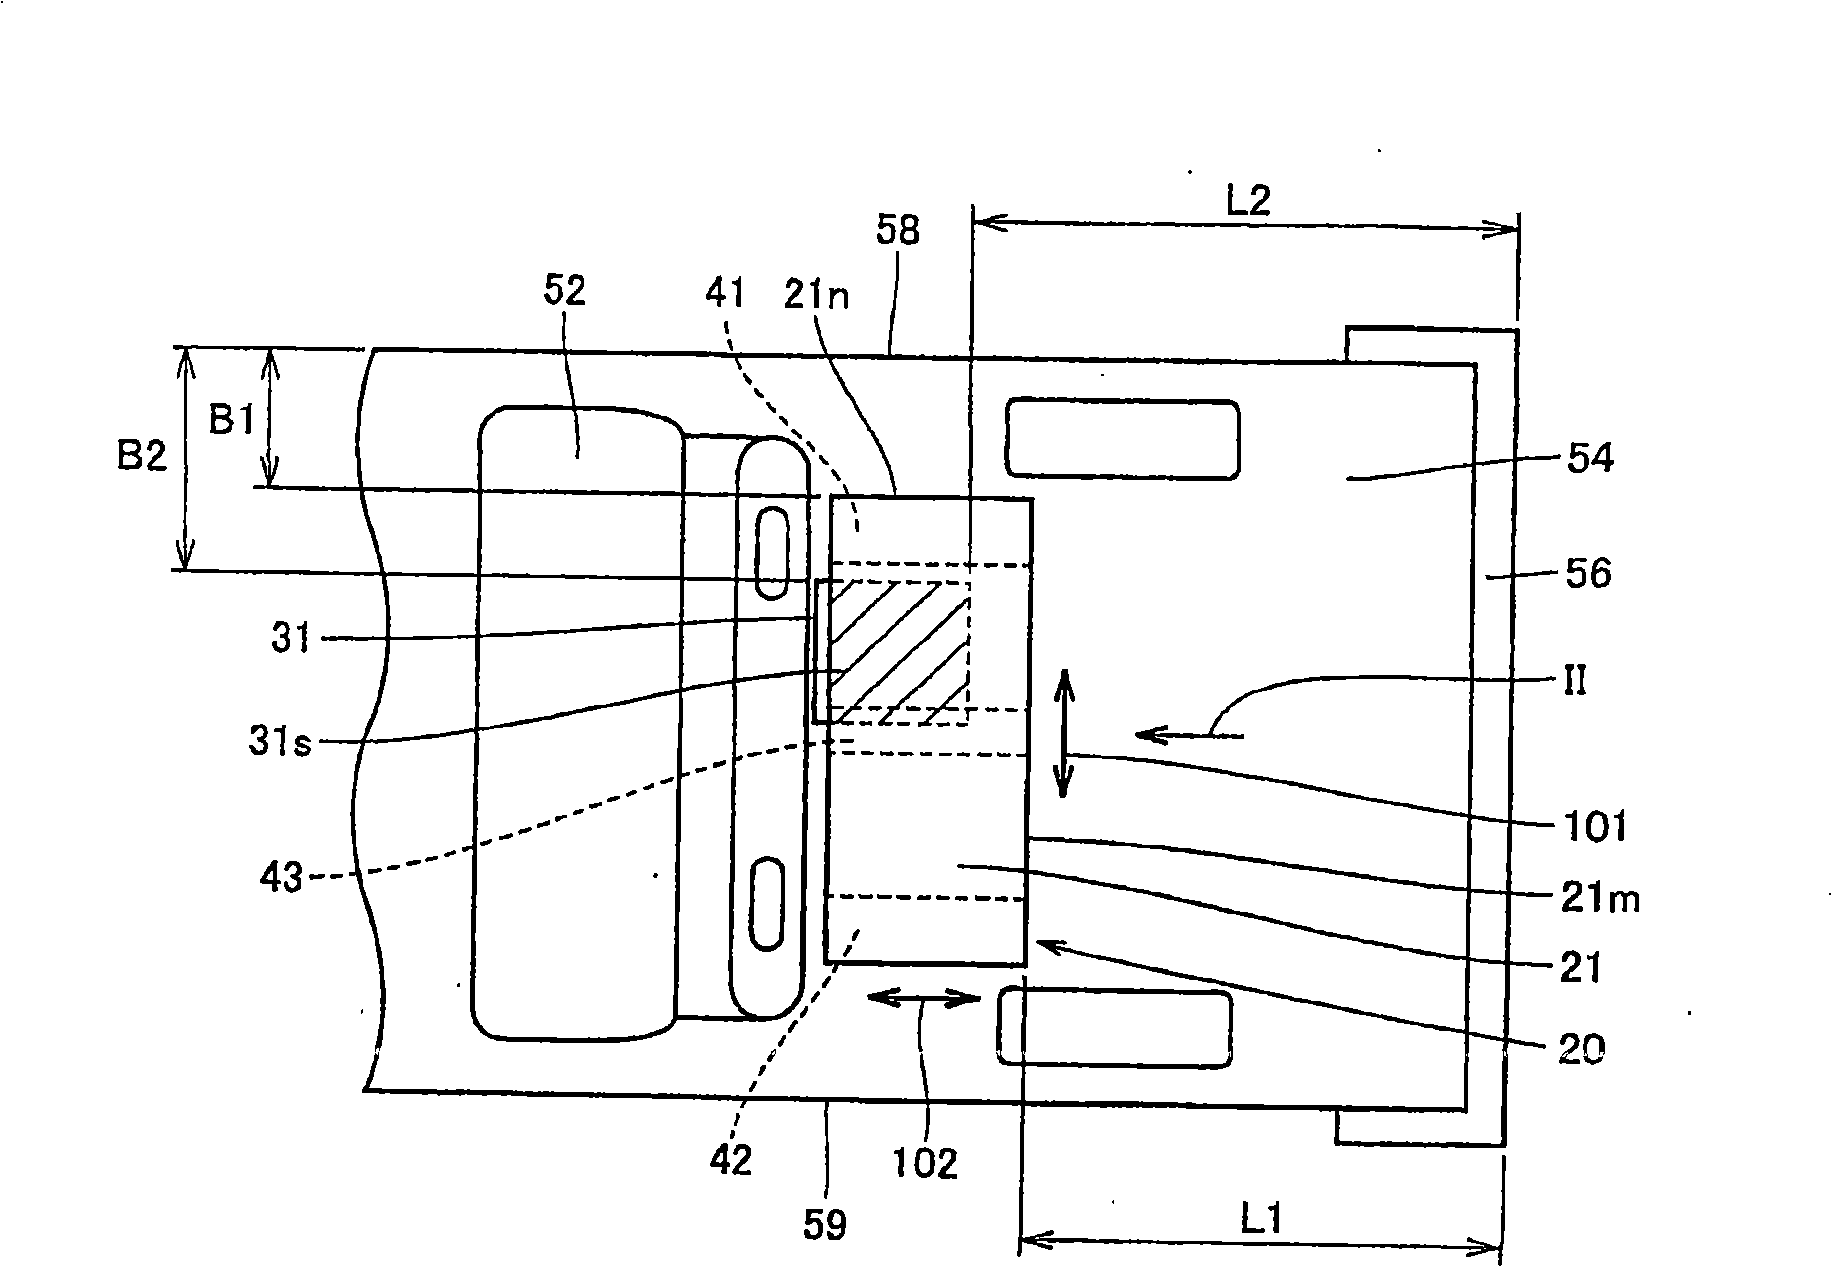 Structure of power supply to be mounted on vehicle